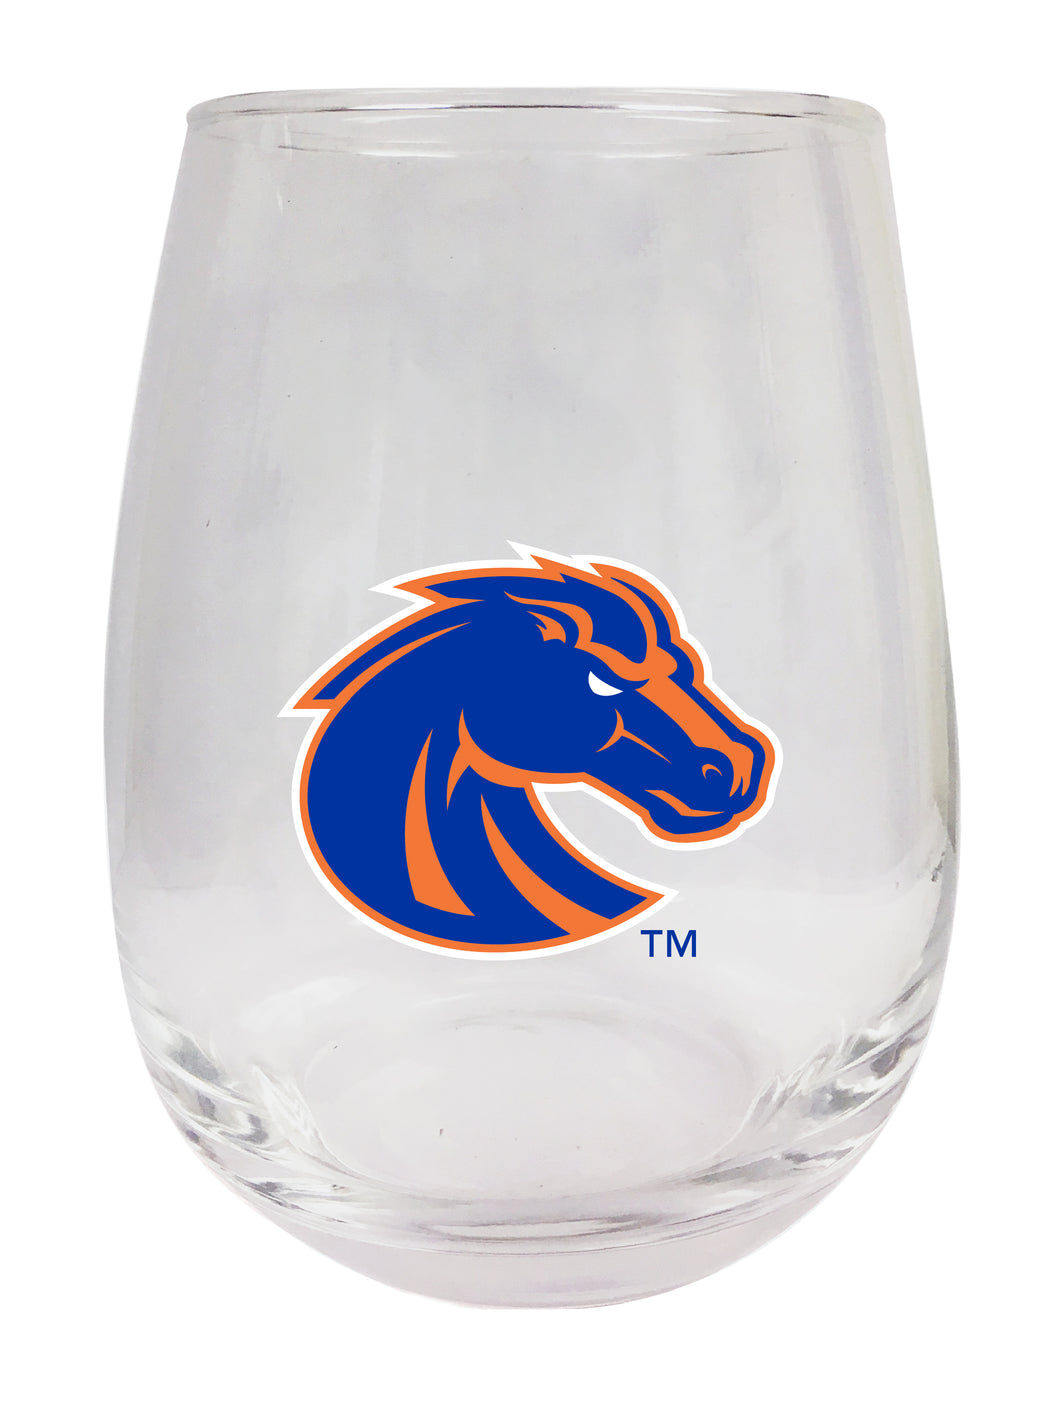 Boise State Broncos Stemless Wine Glass - 9 oz. | Officially Licensed NCAA Merchandise